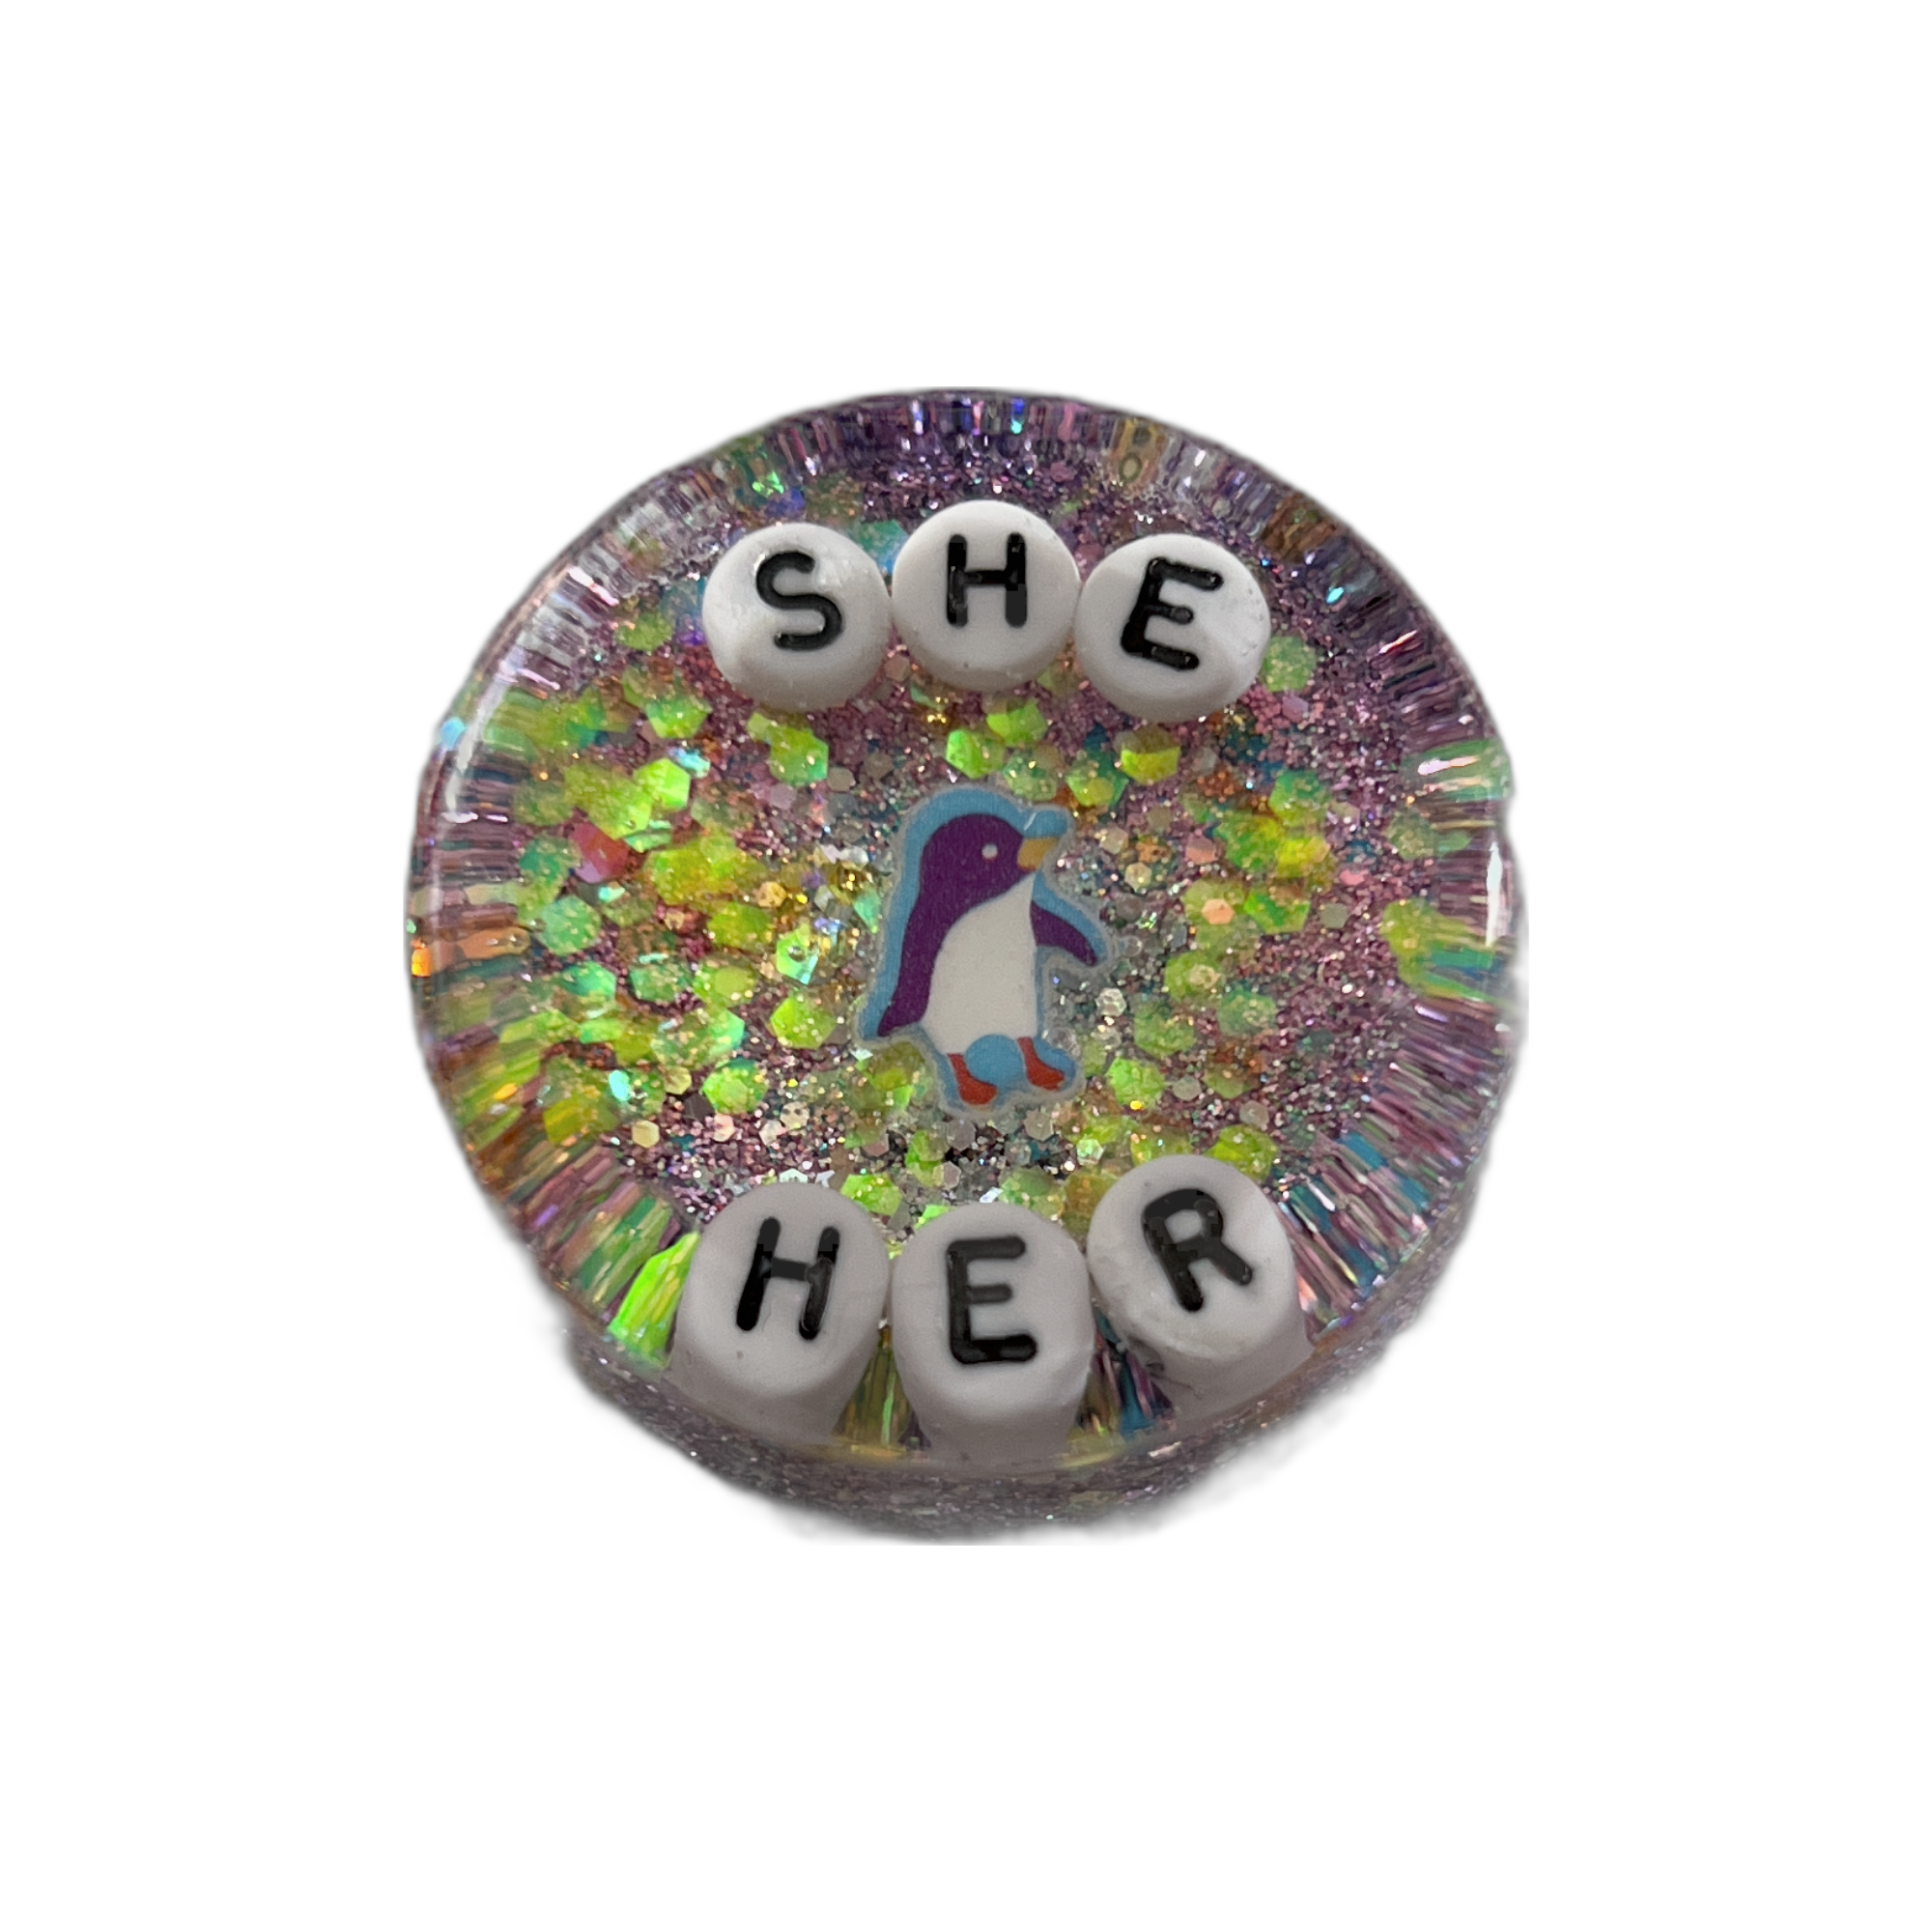 She/Her - Shower Art - READY TO SHIP